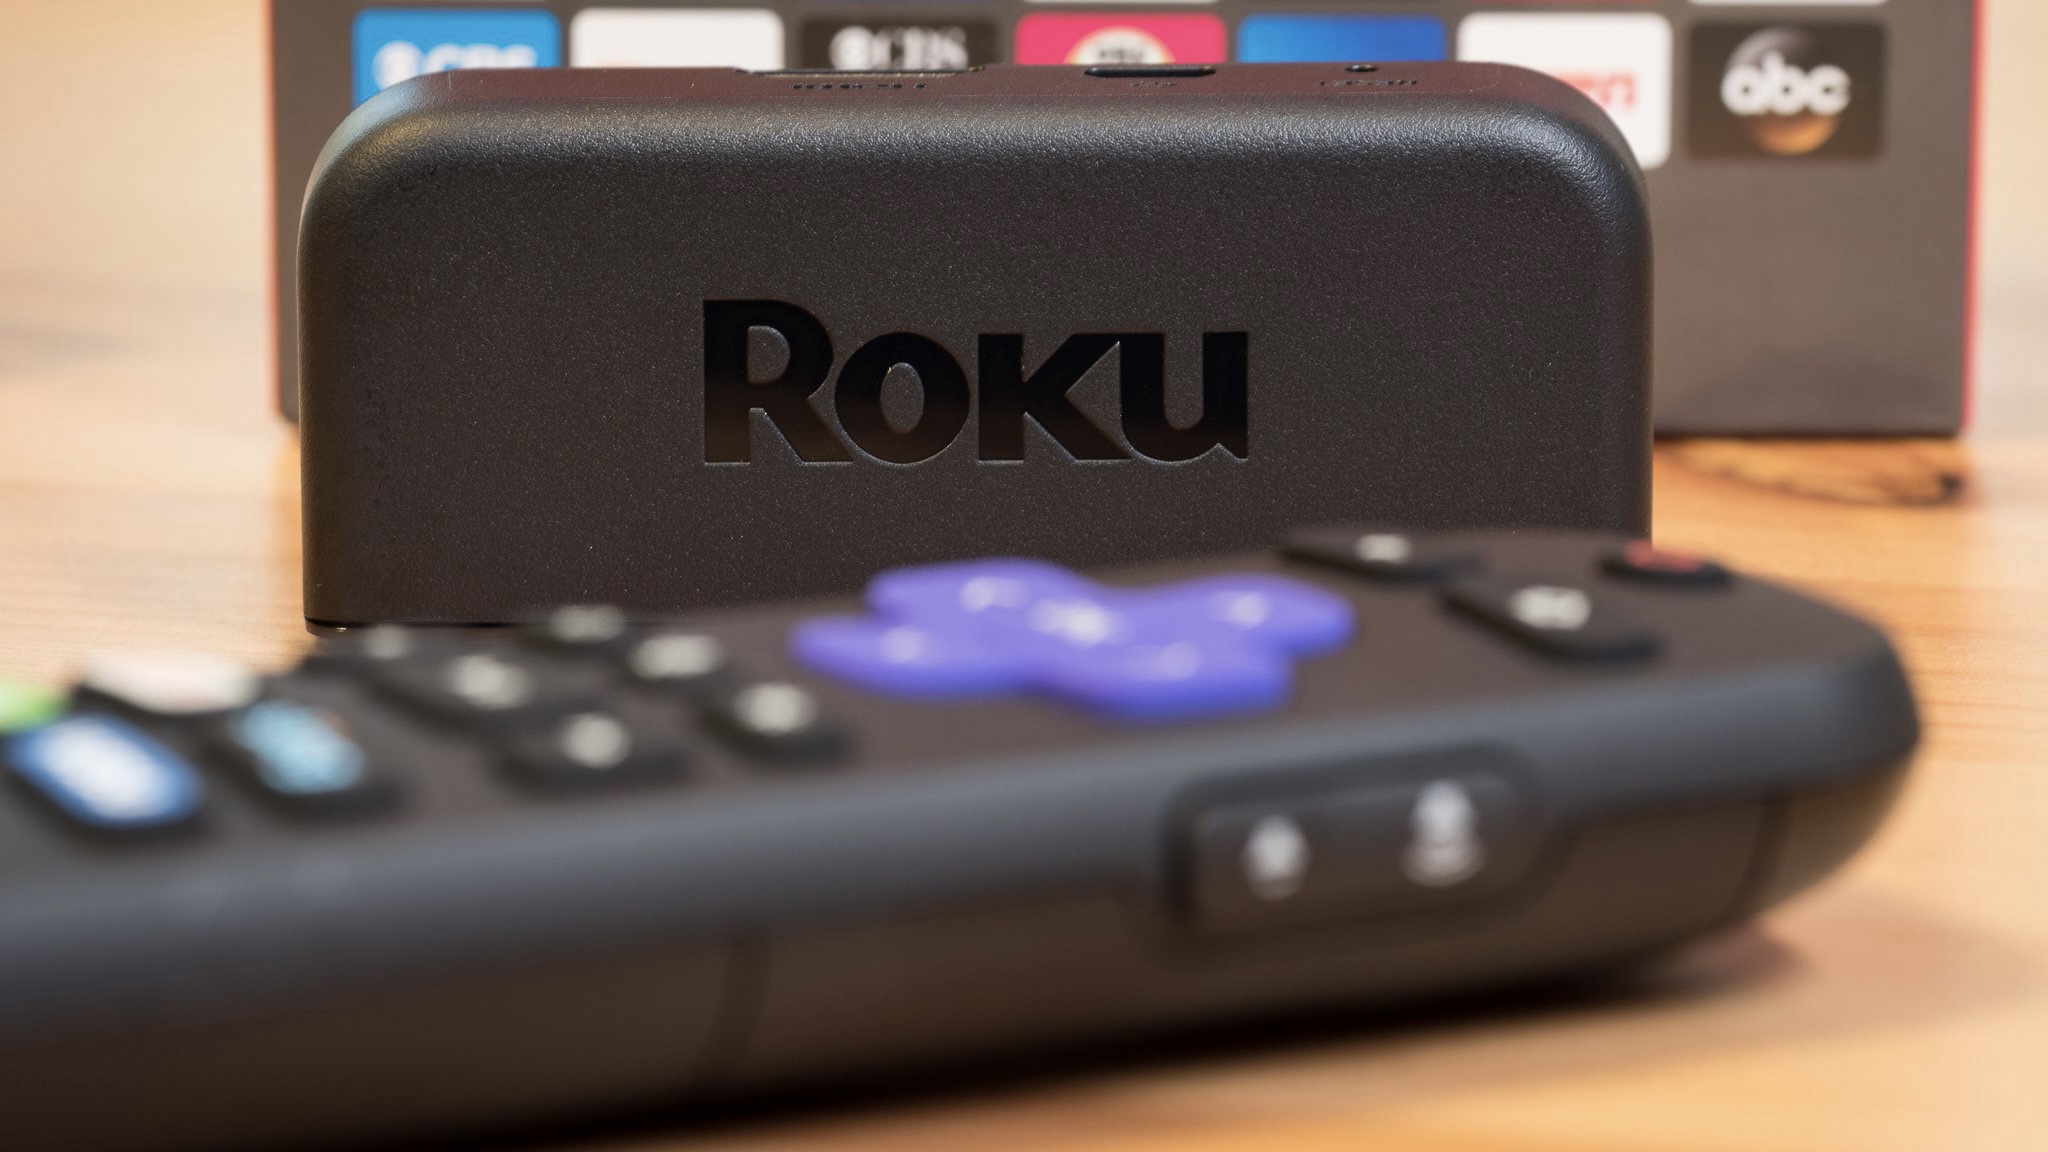 Roku Premiere remote and streaming device